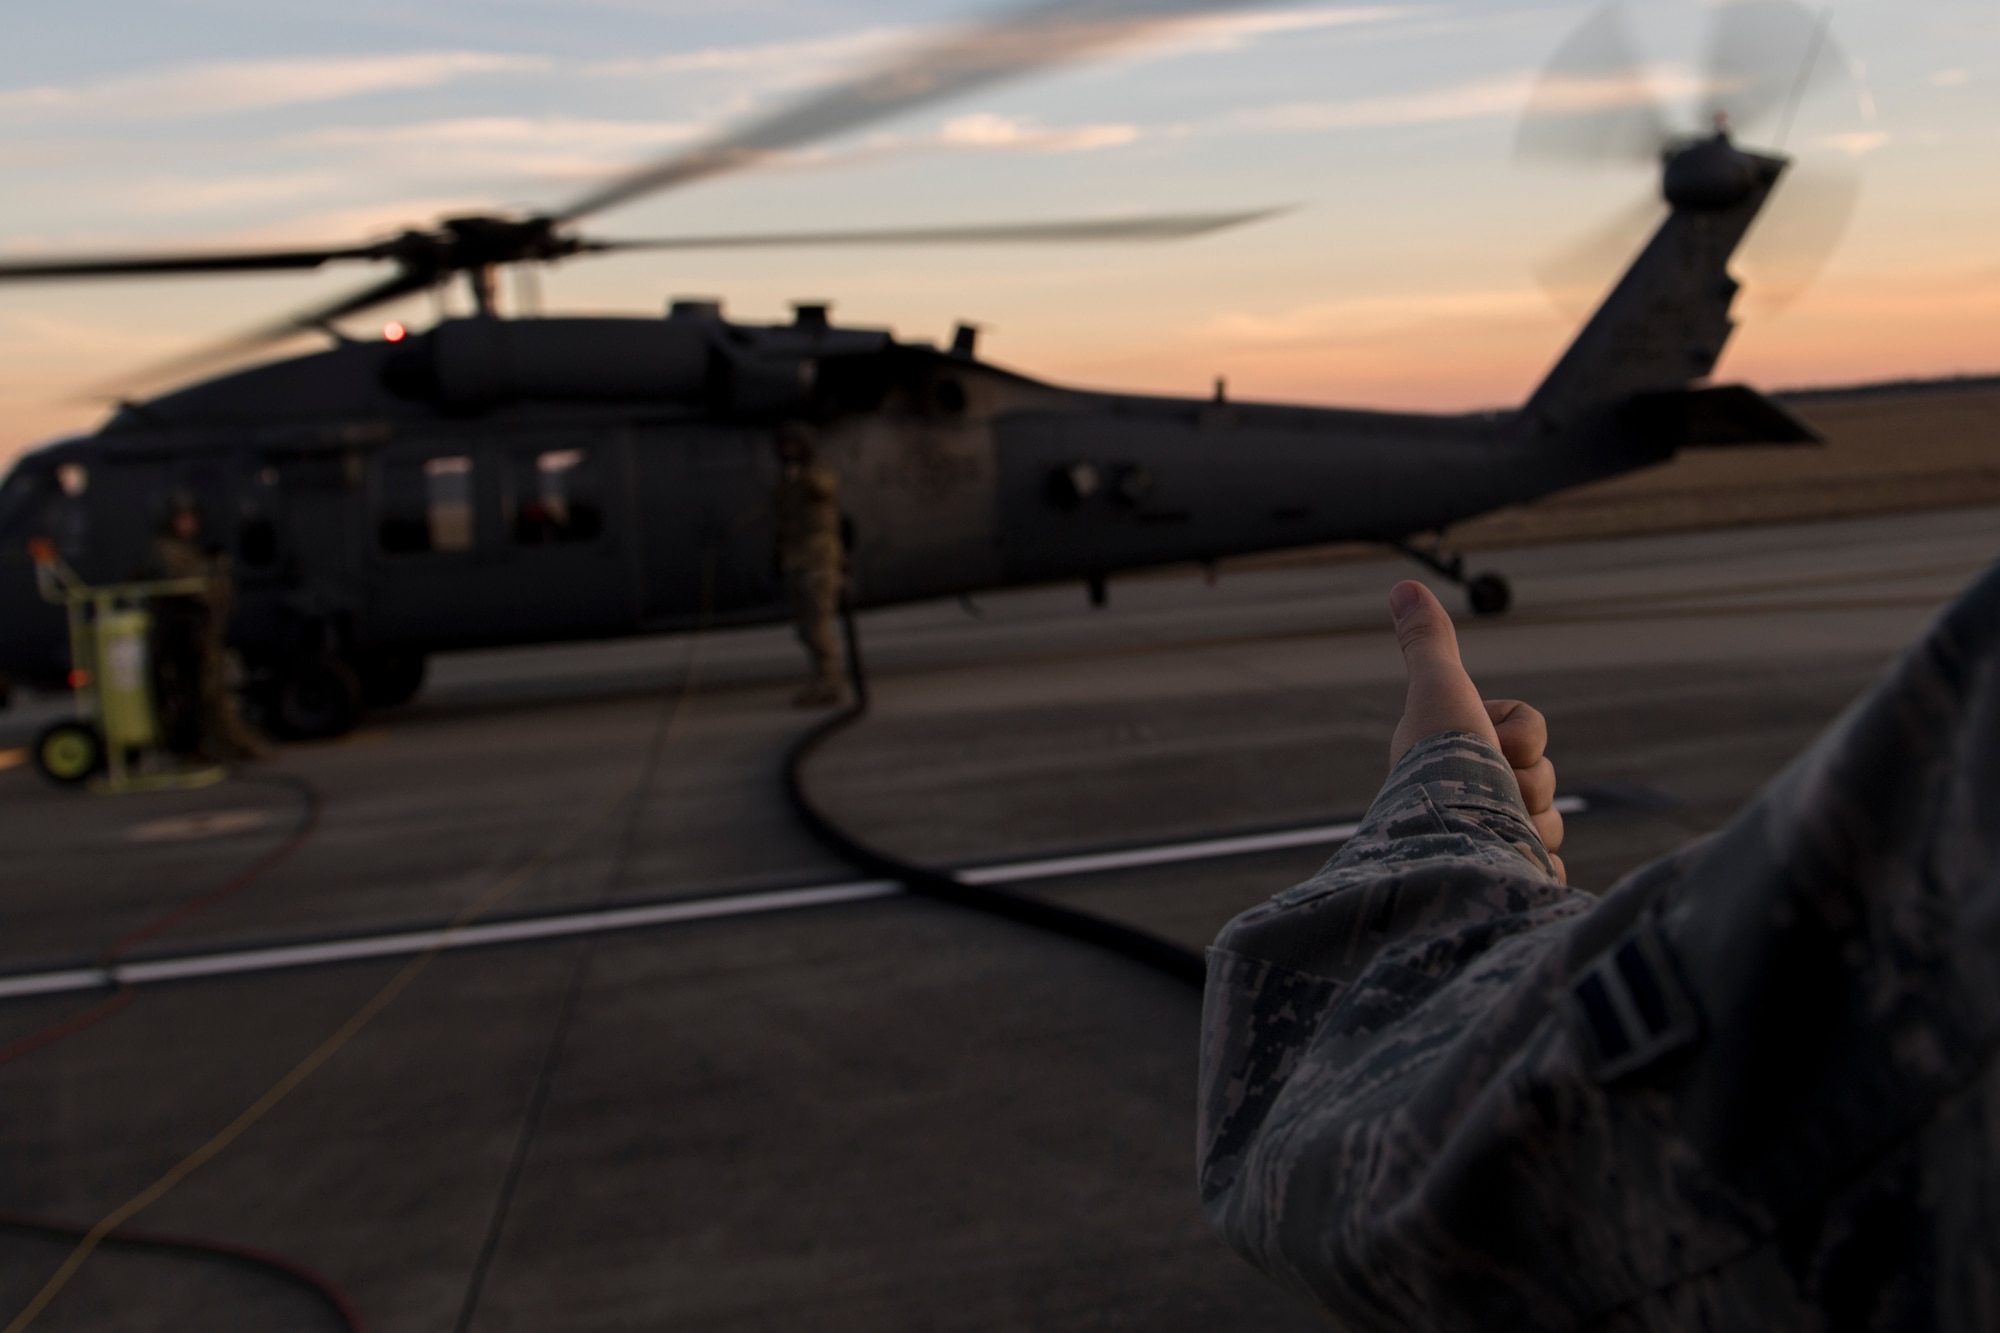 Airman 1st Class Evan Valance, 23d Logistics Readiness Squadron fuels distribution operator, communicates with a special missions aviator assigned to the 41st Rescue Squadron during HH-60G Pave Hawk hot-pit refueling operations, Jan. 16, 2018 at Moody Air Force Base, Ga. Airmen who work in the petroleum, oils and lubricants (POL) flight frequently use hot pit refueling, which is a more efficient tactic that allows aircrews a quick transition from the flight line back to their current objective. (U.S. Air Force photo by Senior Airman Daniel Snider)